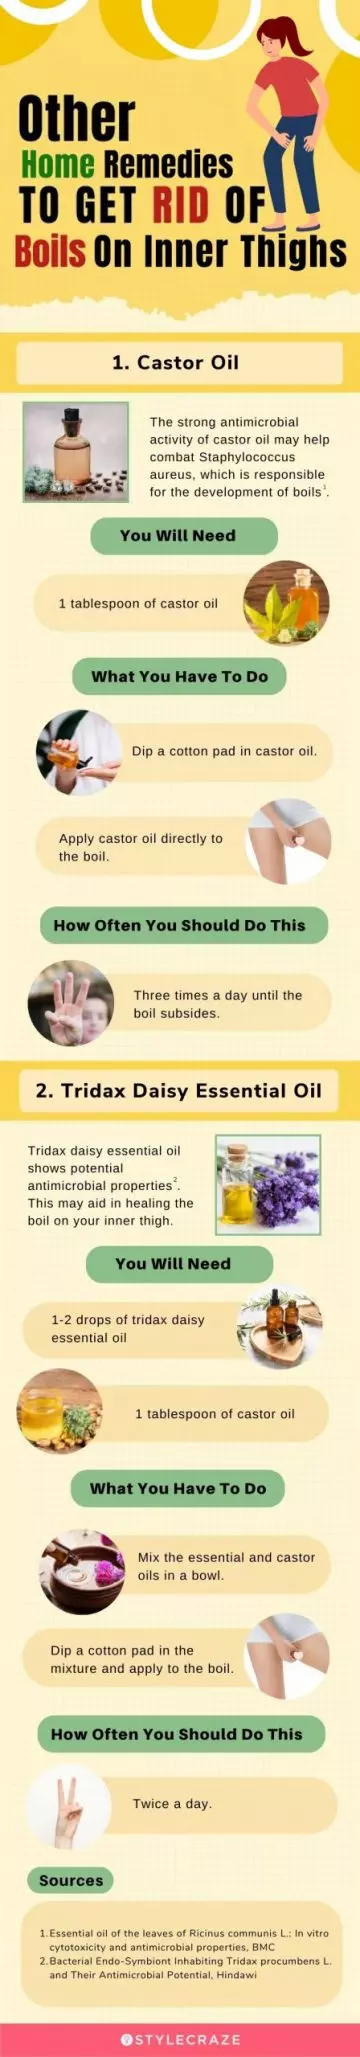 other home remedies to get rid of boils on inner thighs (infographic)